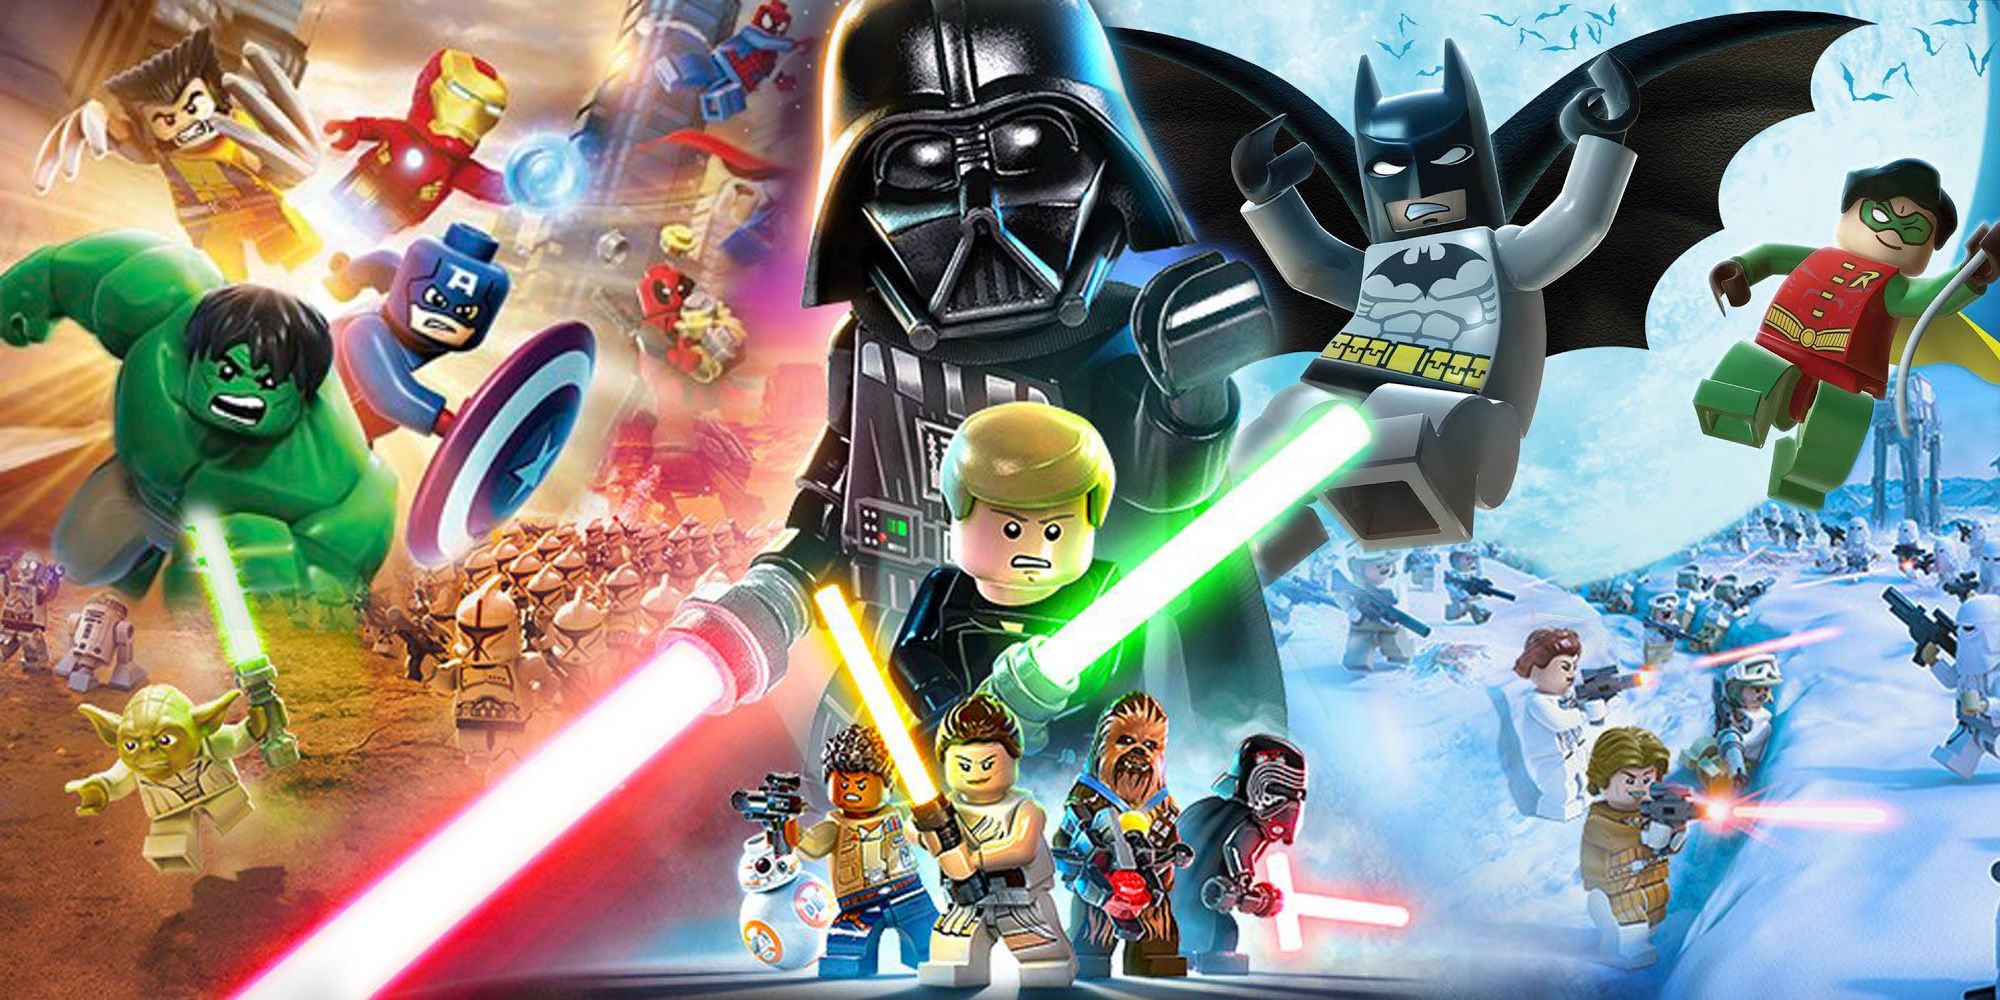 LEGO Star Wars, LEGO Marvel Superheroes, and LEGO Batman aren't what you remember